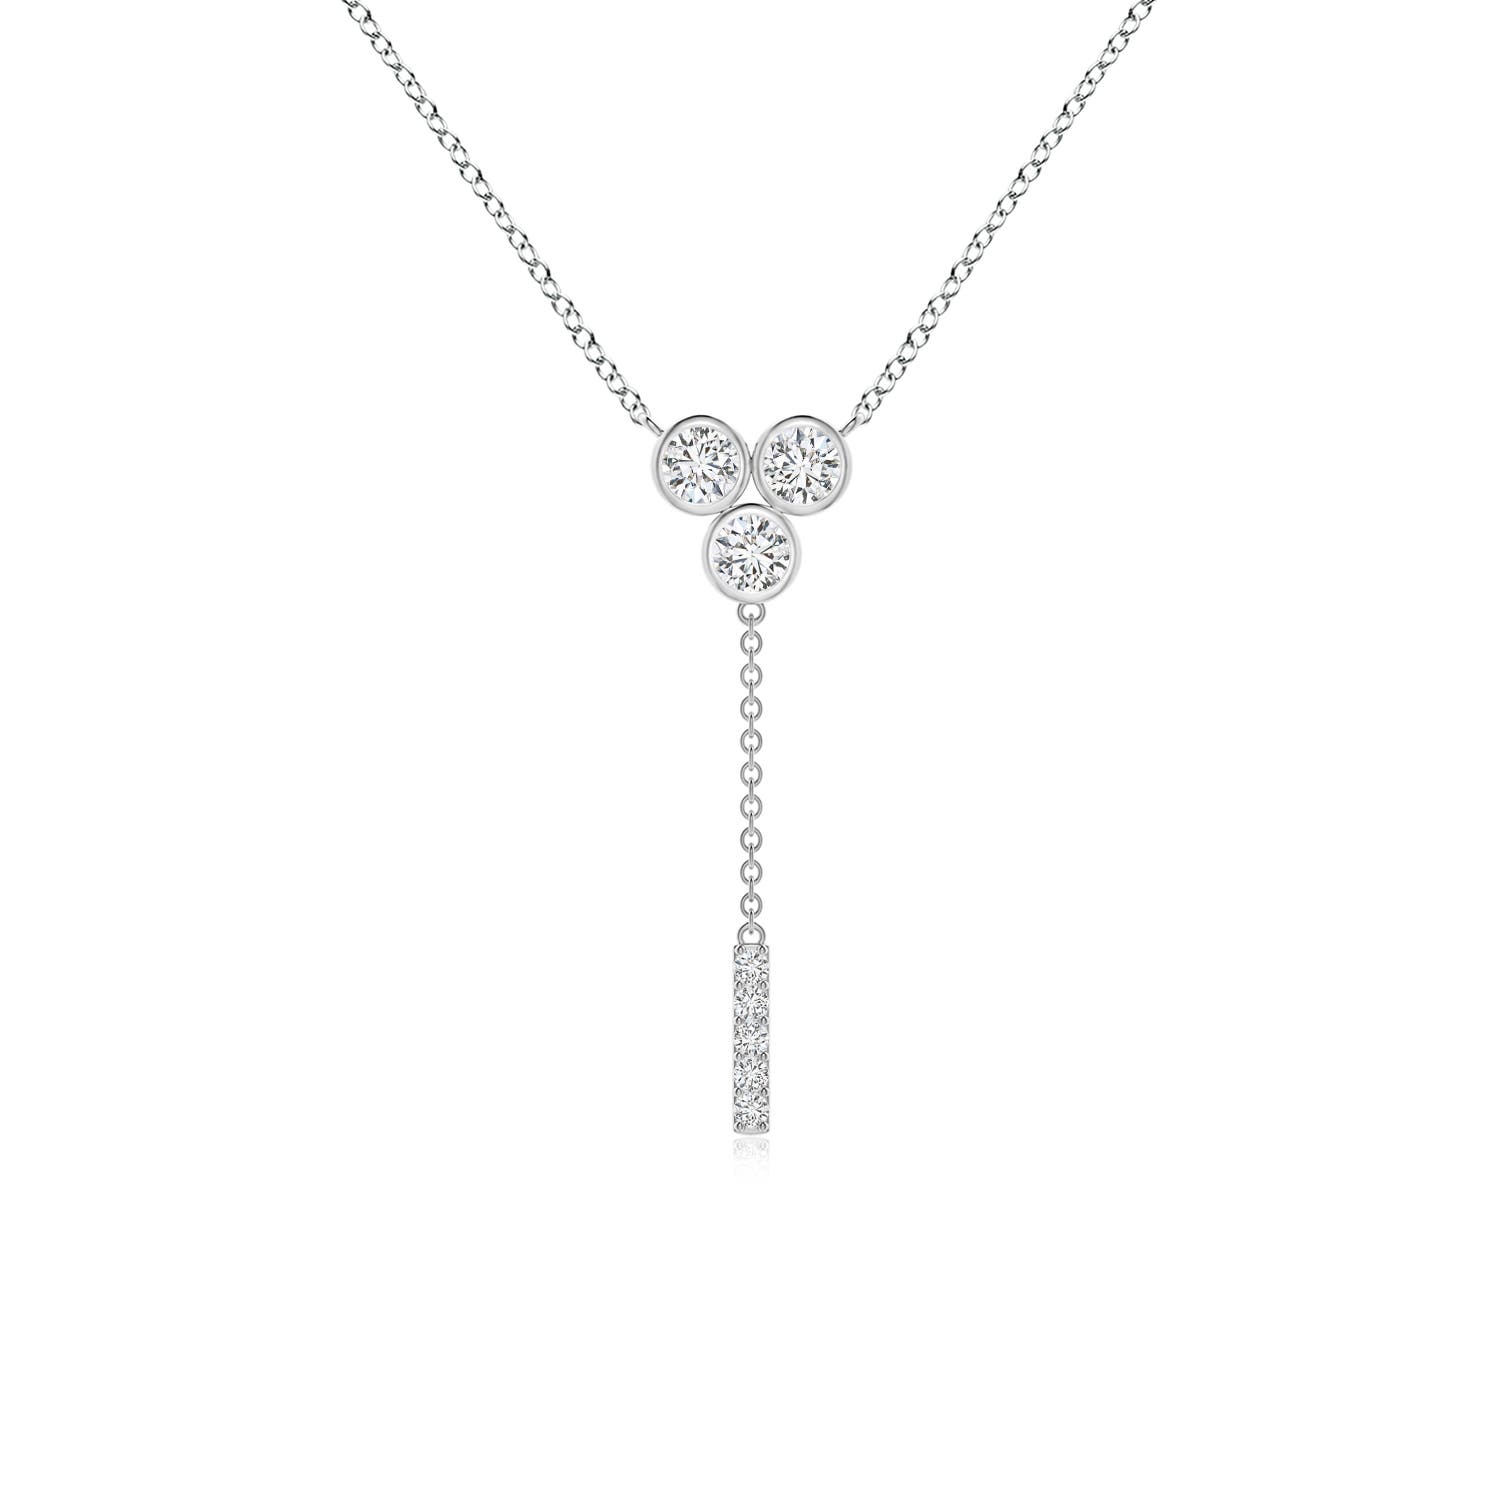 H, SI2 / 0.51 CT / 14 KT White Gold